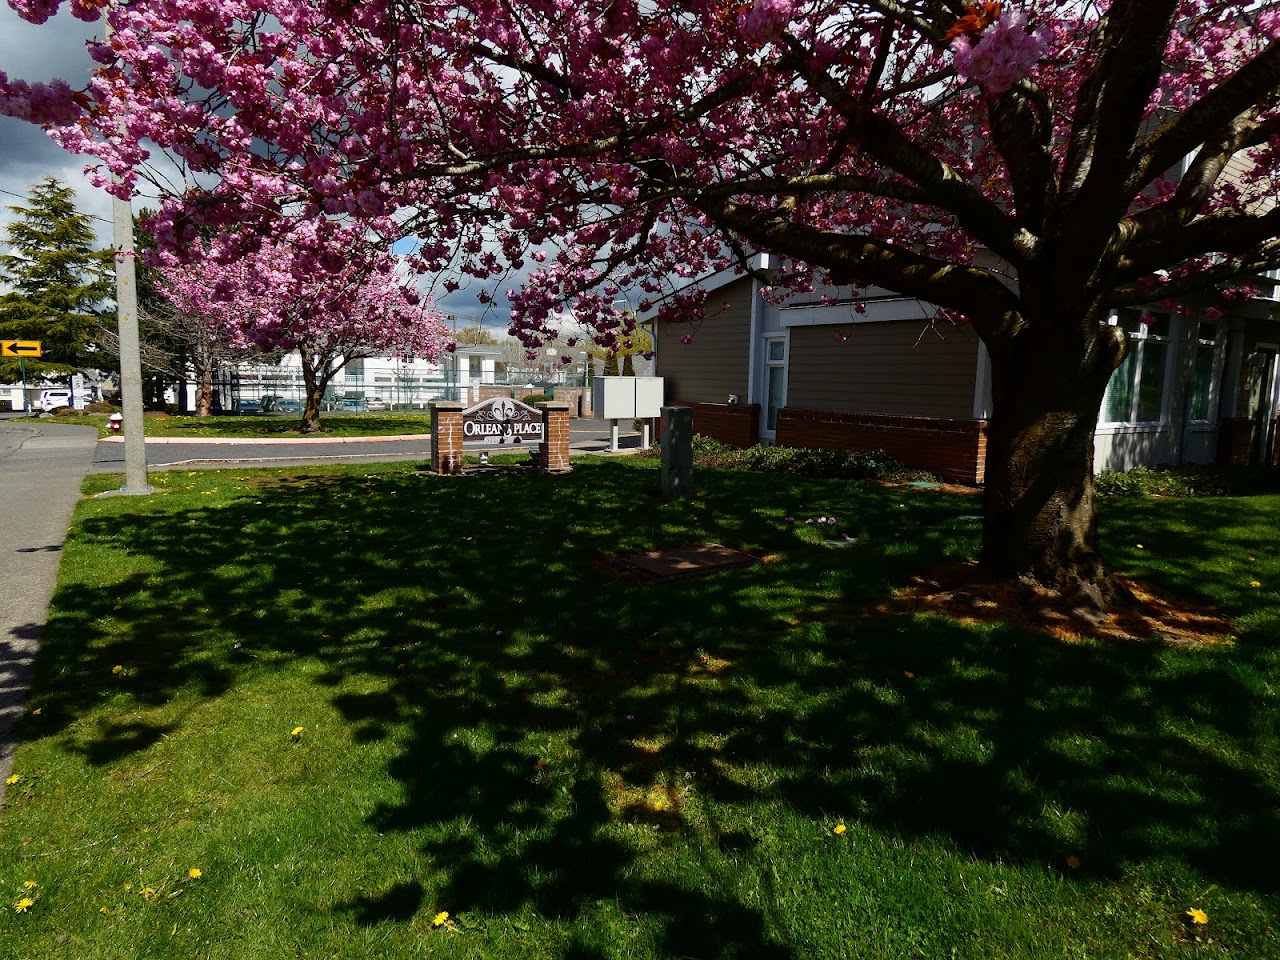 Photo of ORLEANS PLACE. Affordable housing located at 3220 ORLEANS PLACE BELLINGHAM, WA 98226